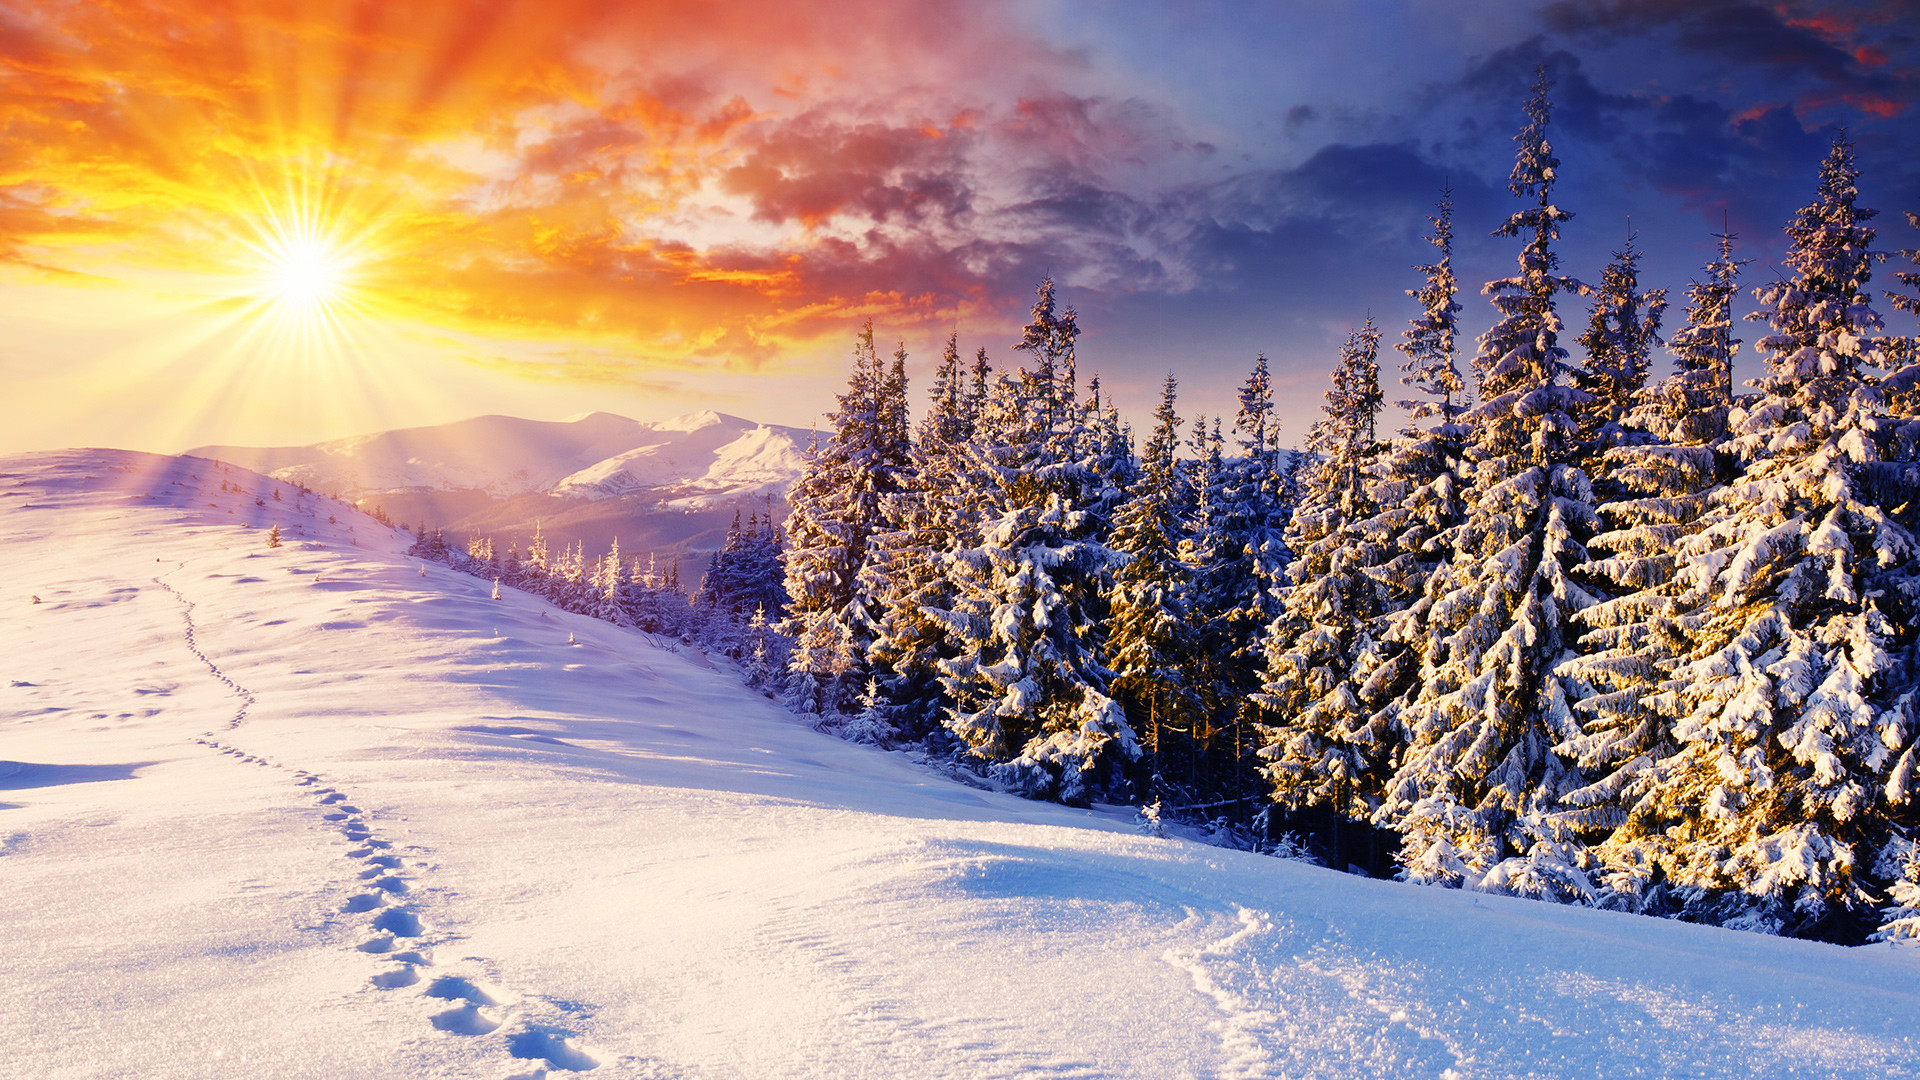 1920x1080 Free Winter Background Images